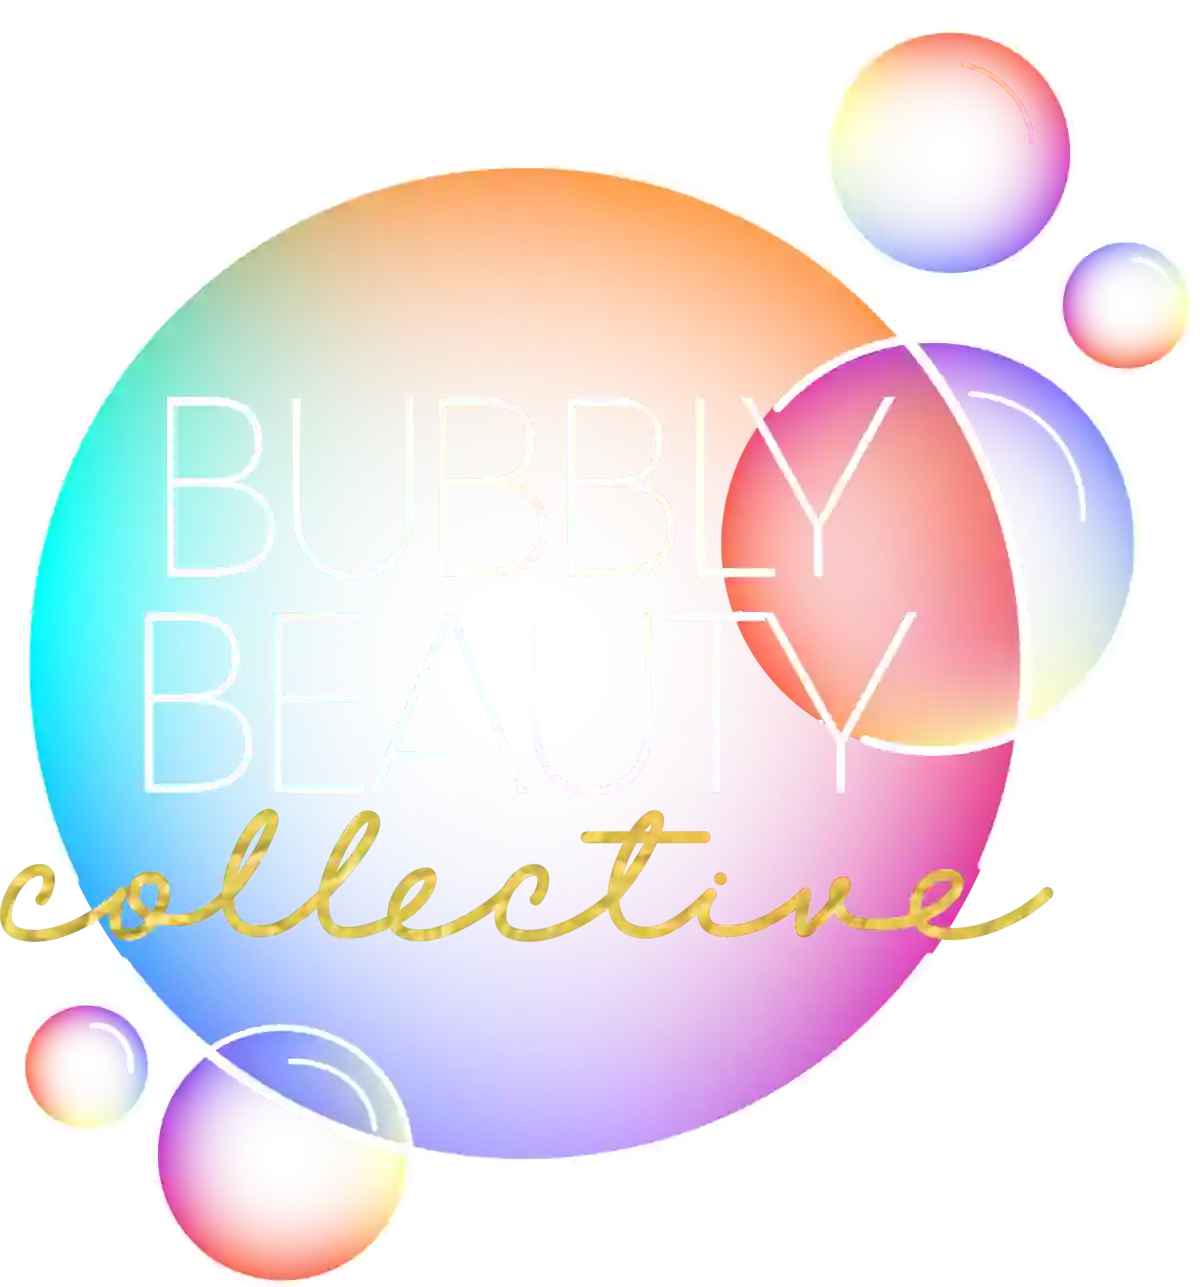 The Bubbly Beauty Collective